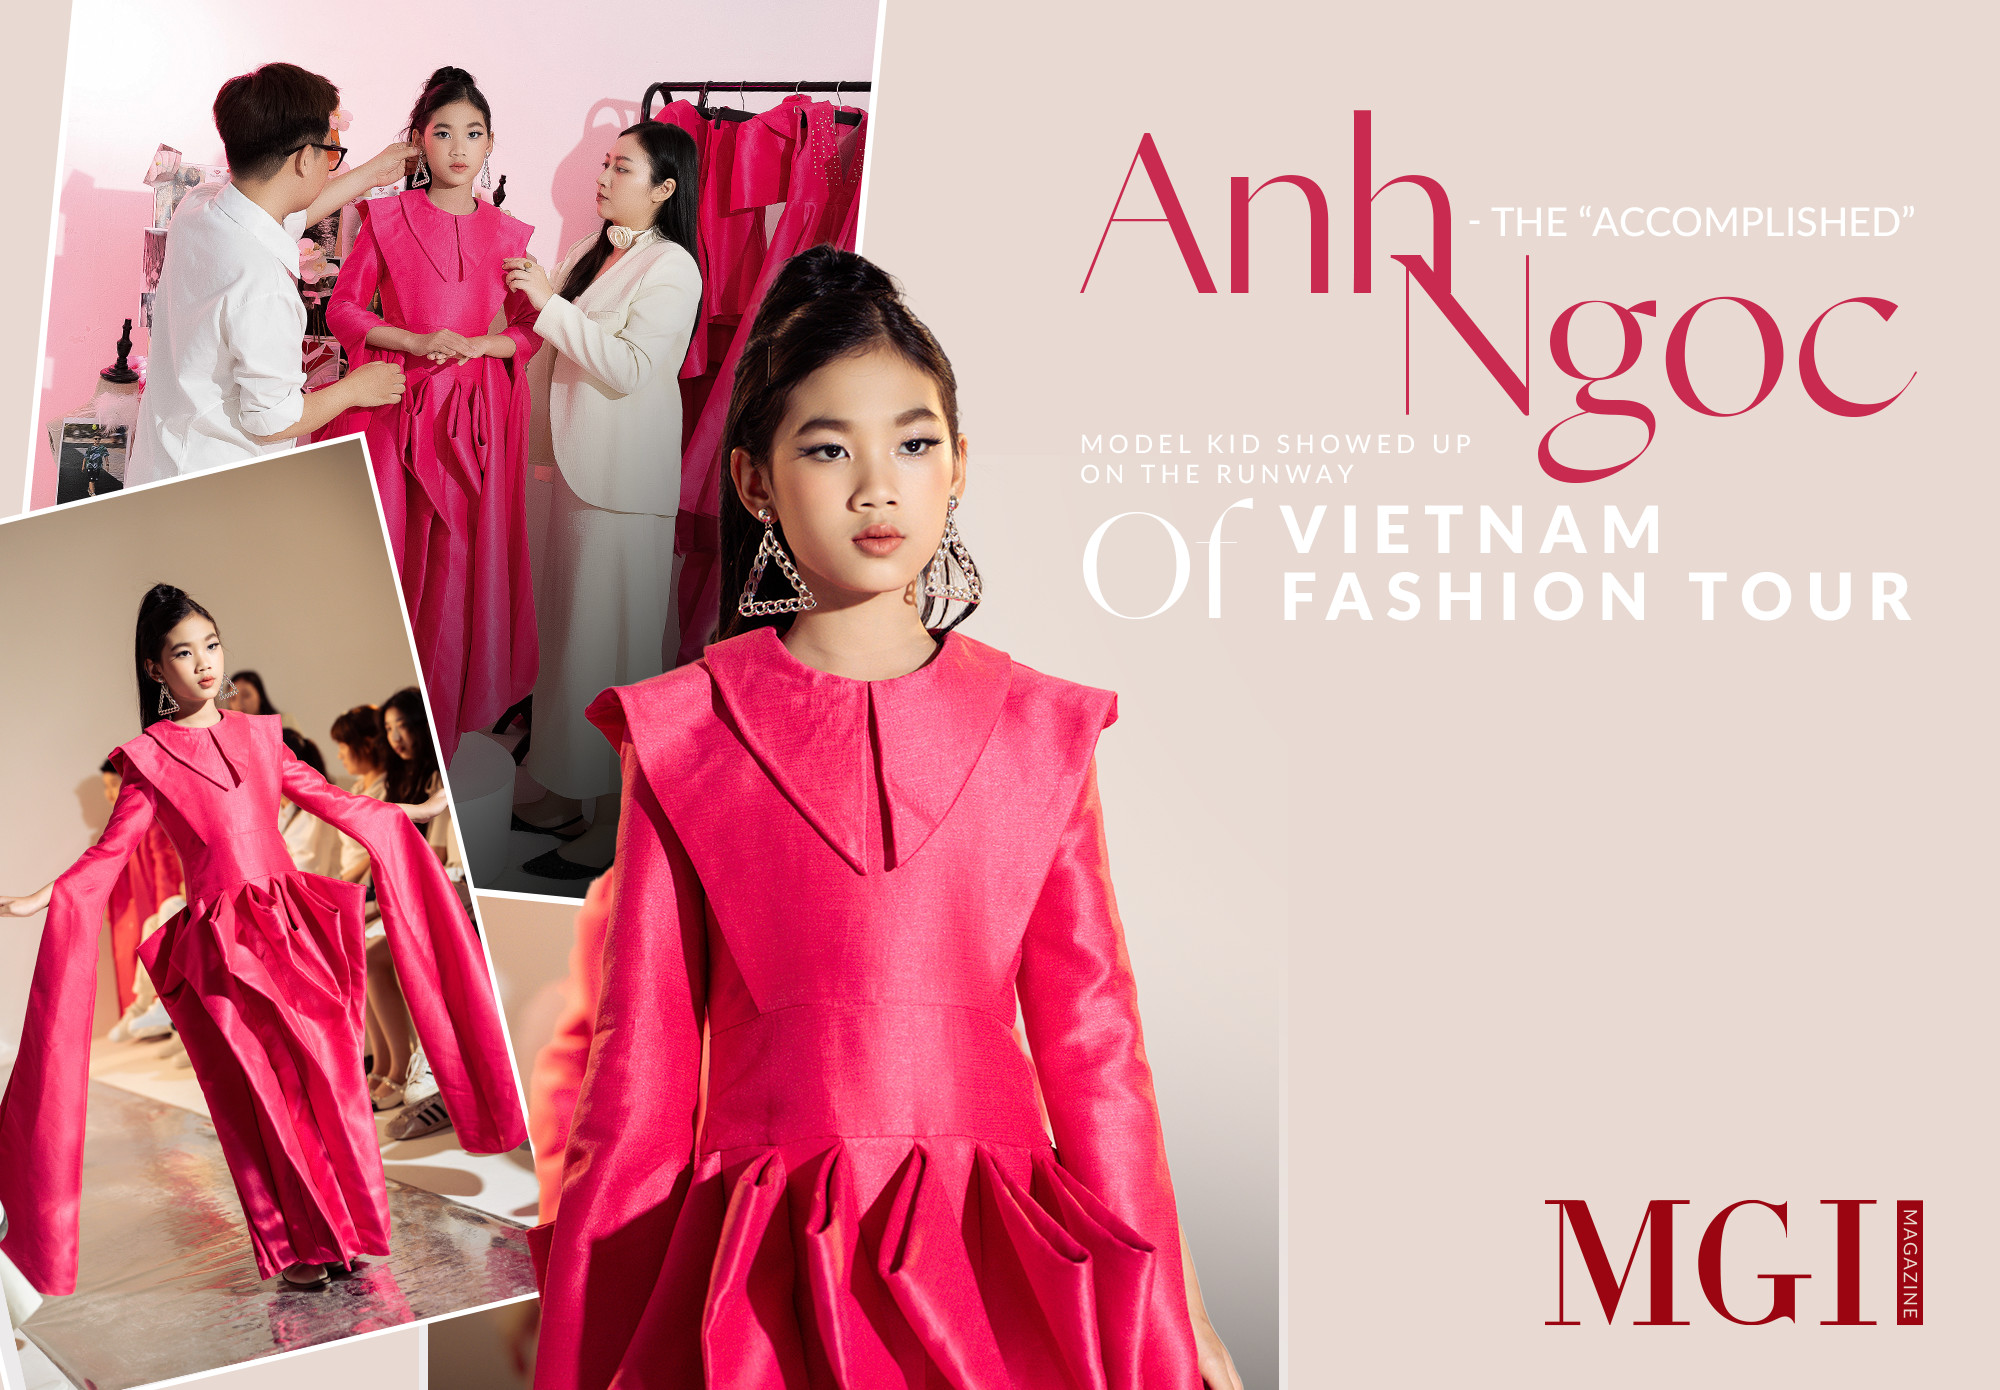 Anh Ngoc - the model kid “for all seasons” showing up on the stage of Vietnam Fashion Tour